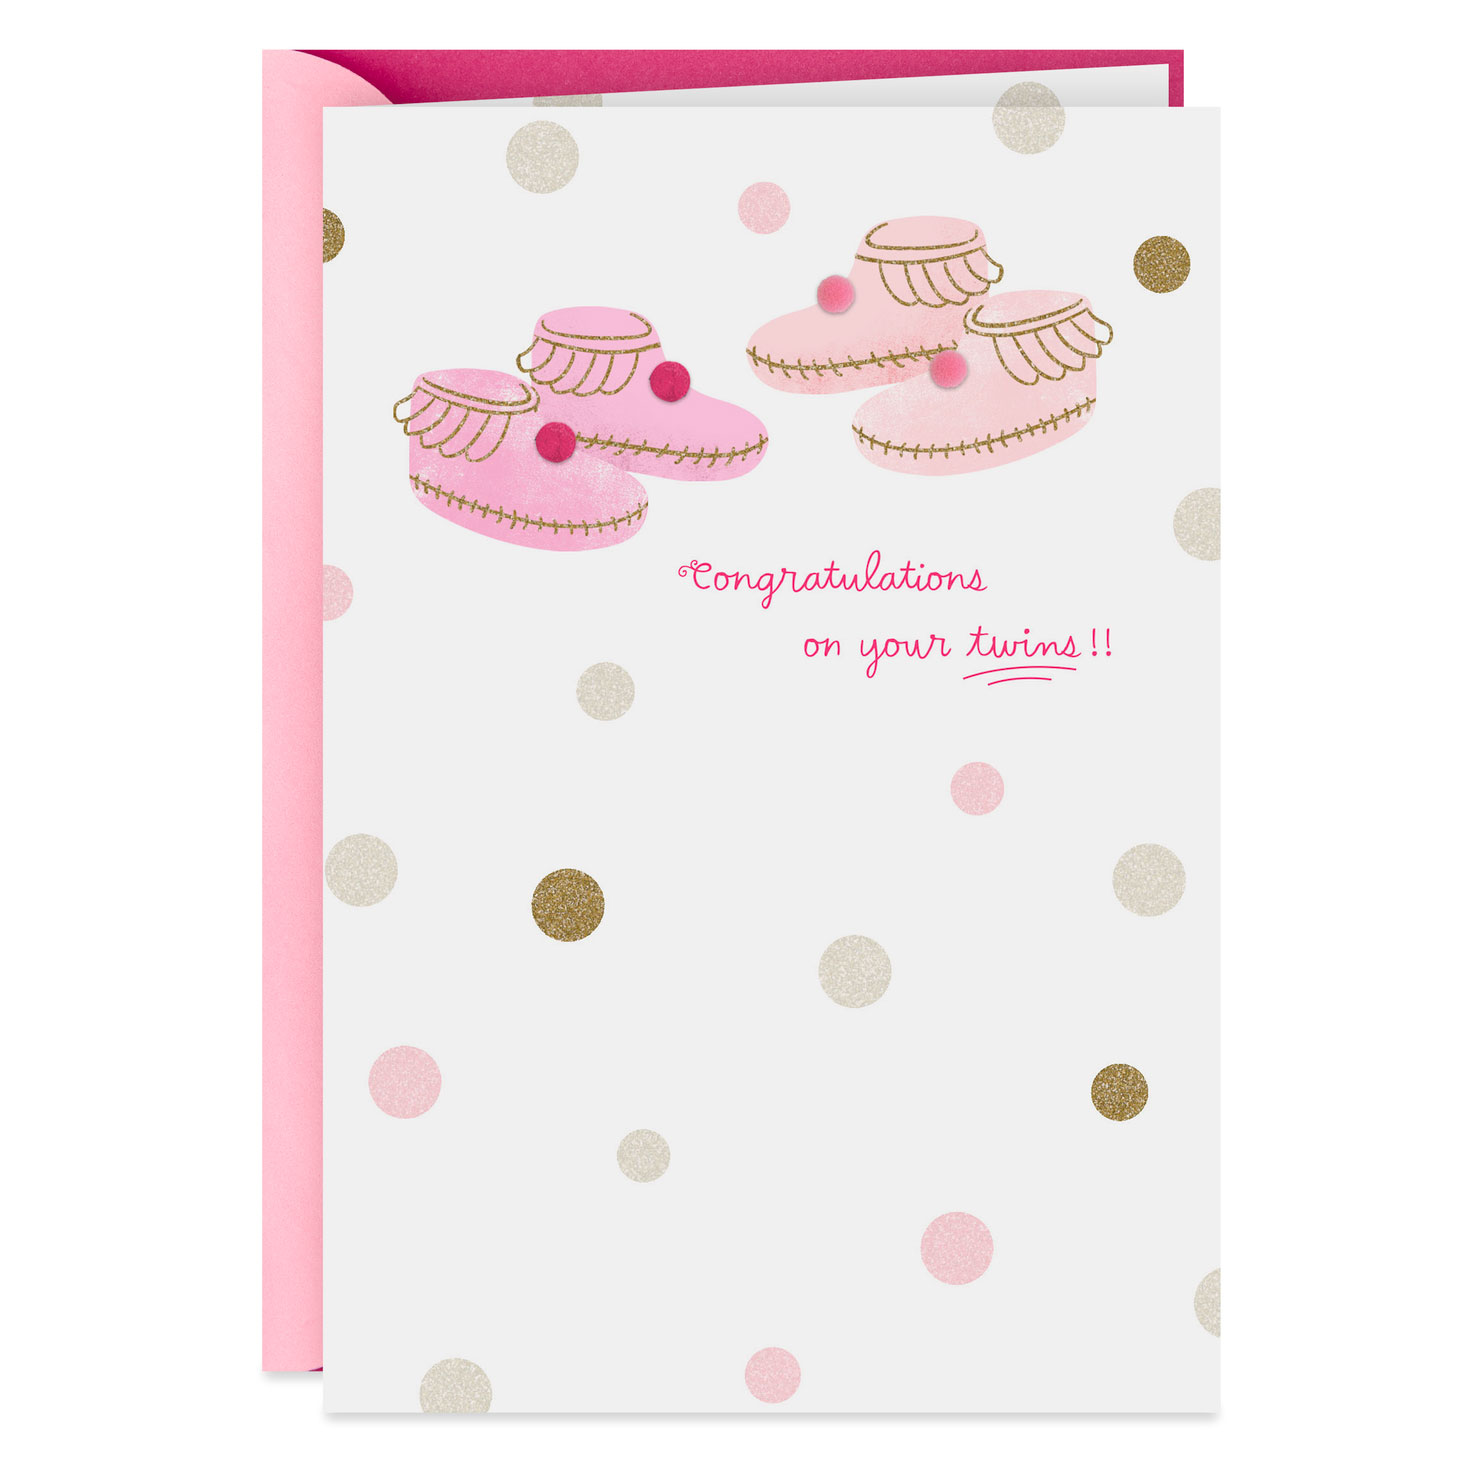 You Have New Twin Daughters Girls Black Baby Personalised New Baby Card